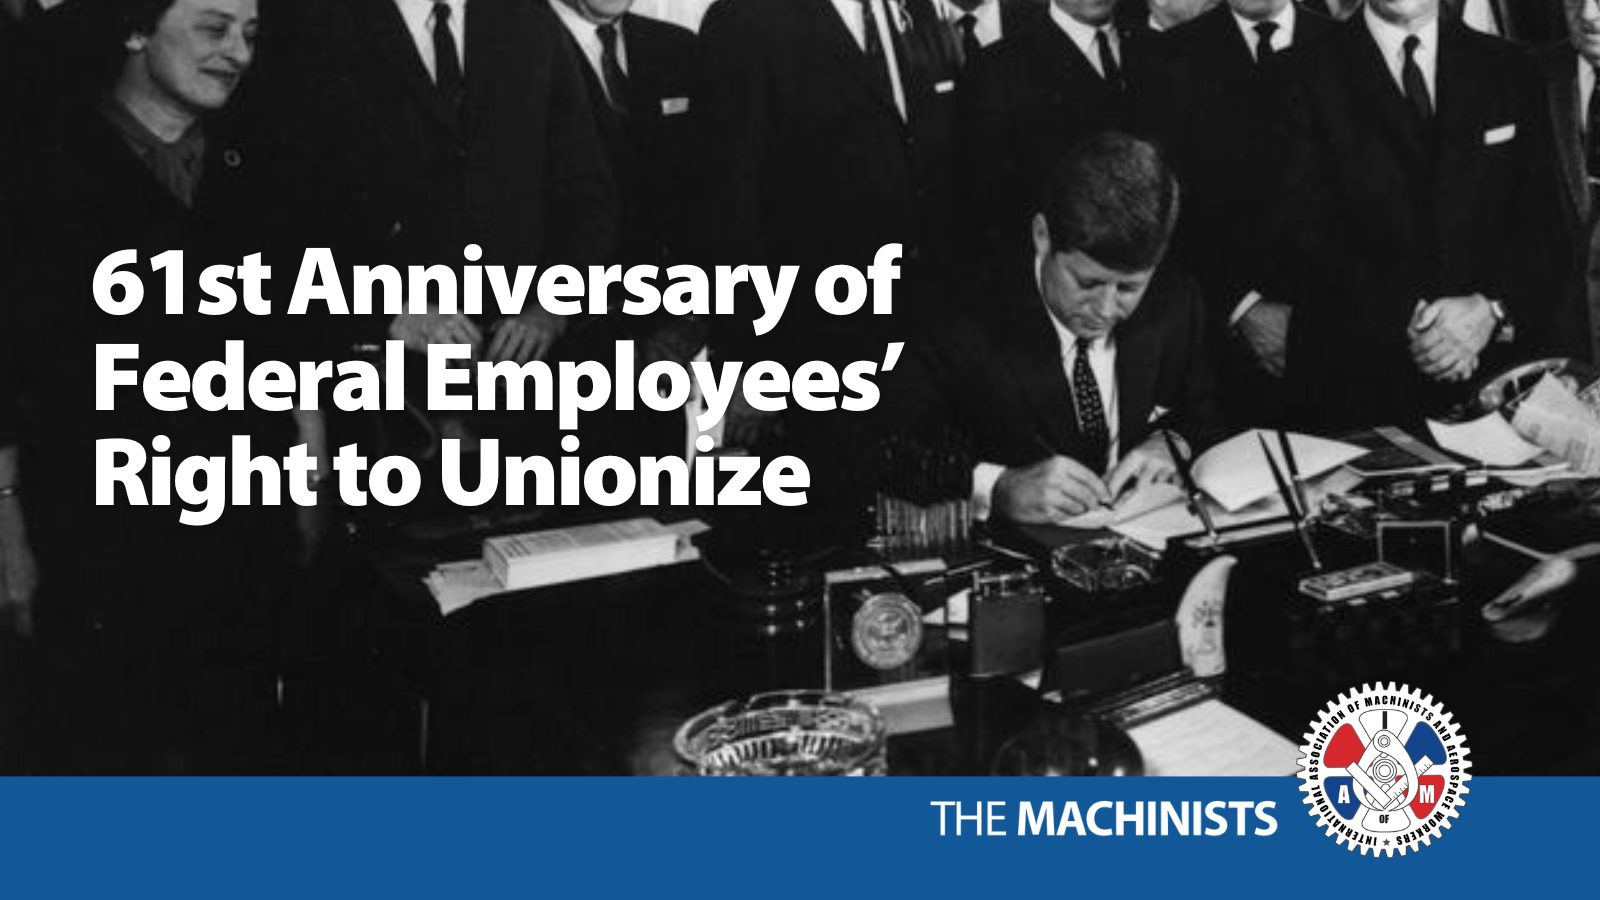 Today is the 61st Anniversary of Federal Employees’ Right to Unionize